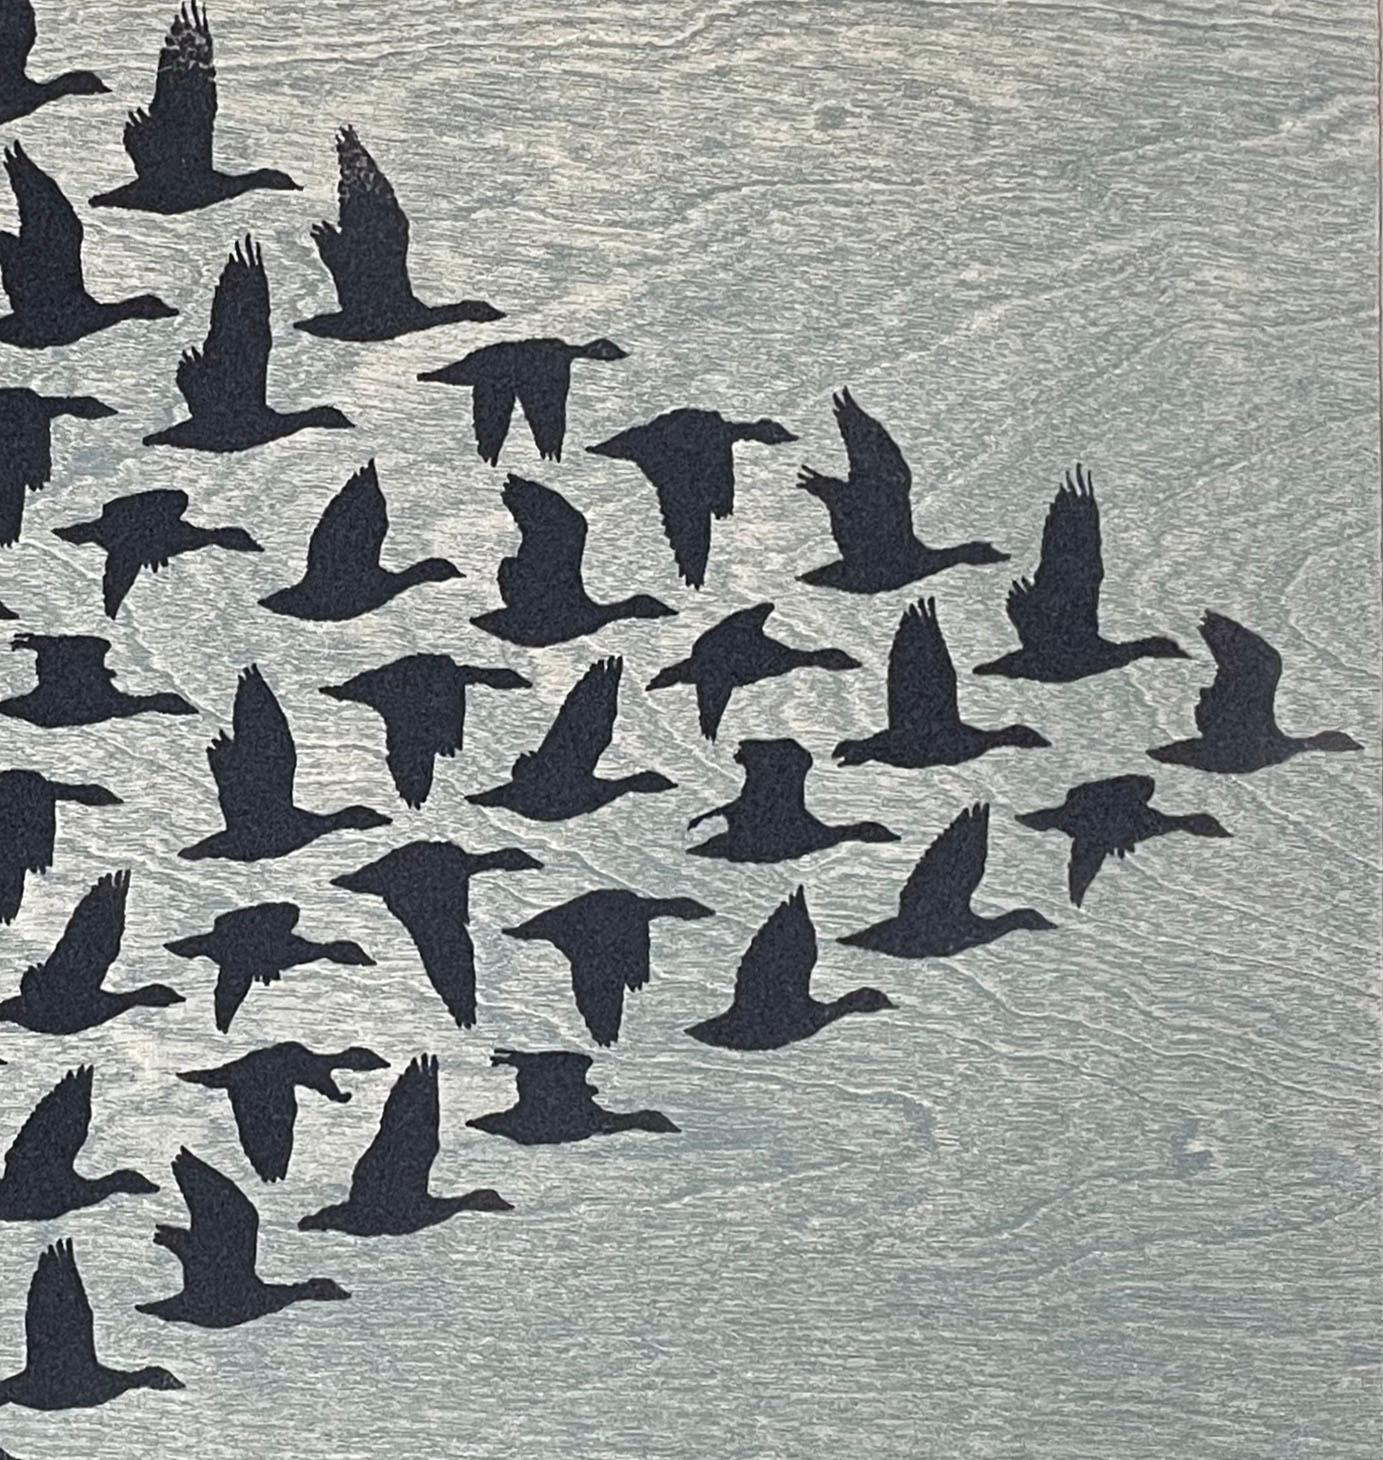 Skein Flock, by Kelvin Mann
Medium: Woodblock with silk screen and flock fibers
Image size:  29.5 x 29 inches
Edition of 50

Kelvin Mann's 